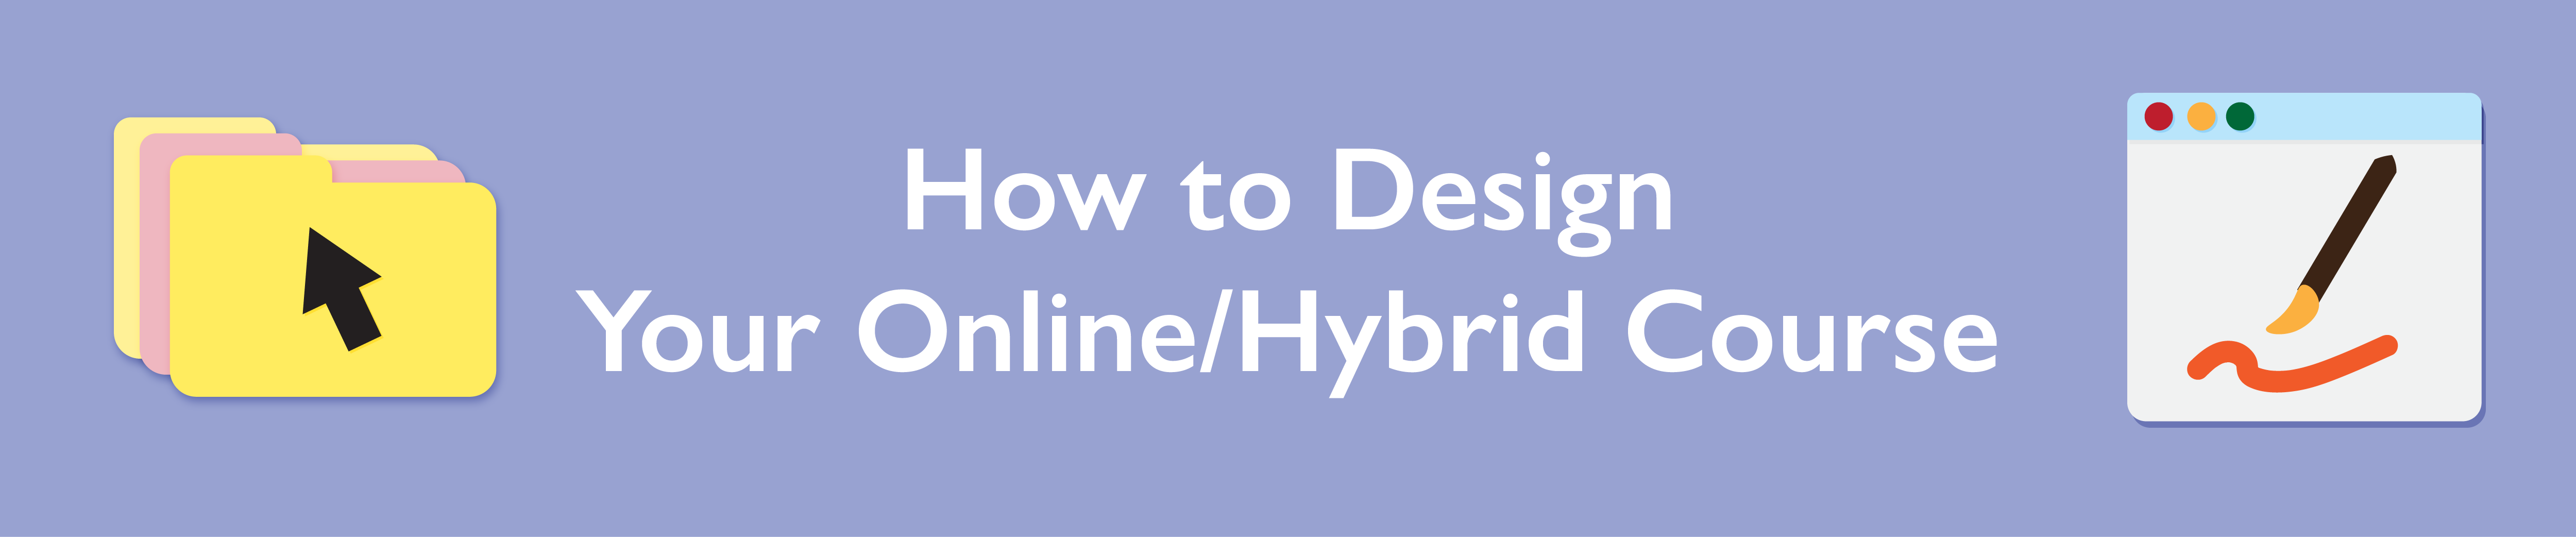 Image graphic for "how to design"